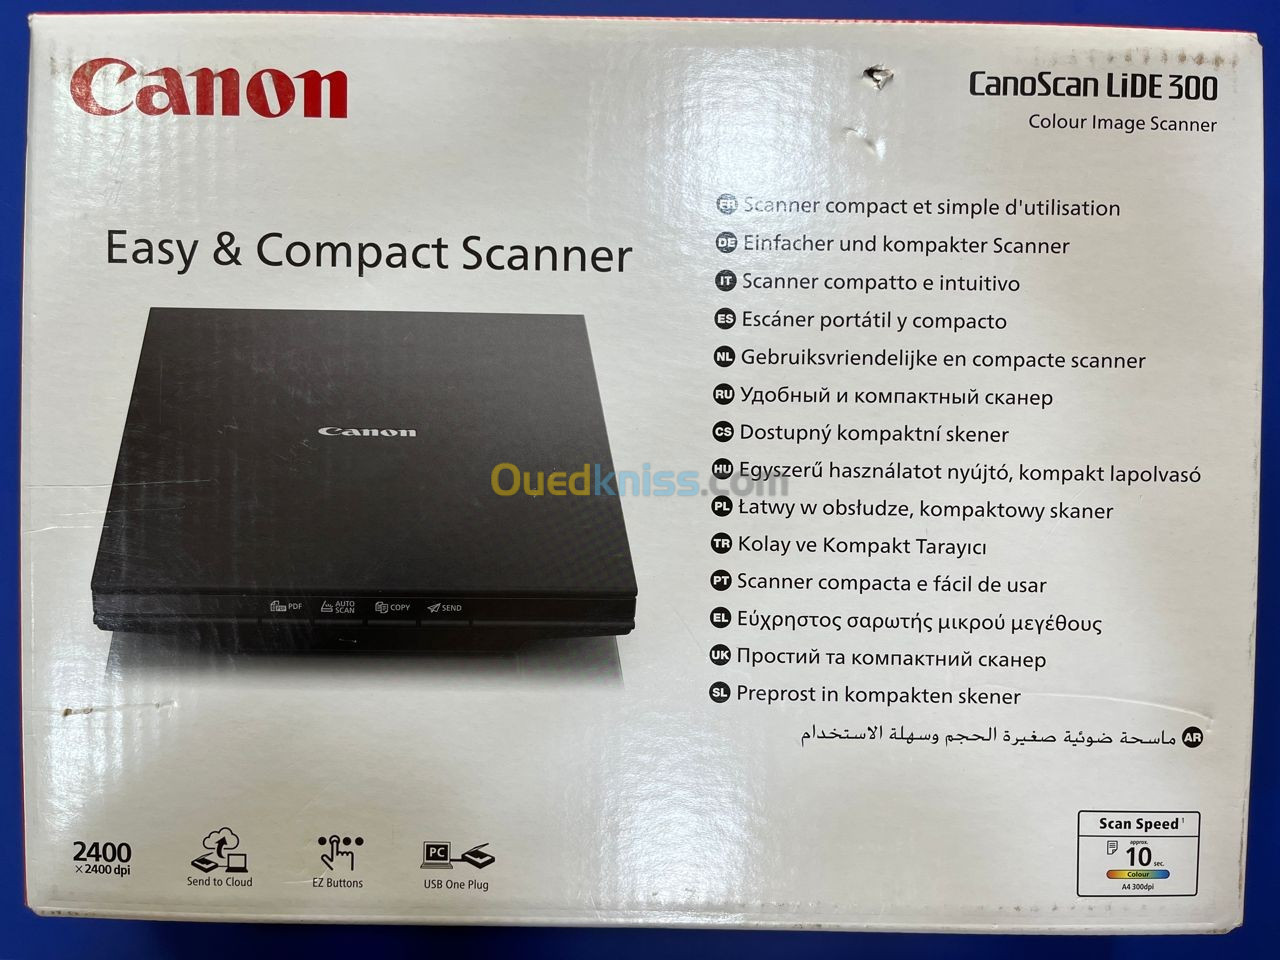 canon CanoScan LiDE 300 Full Driver & Software Package 